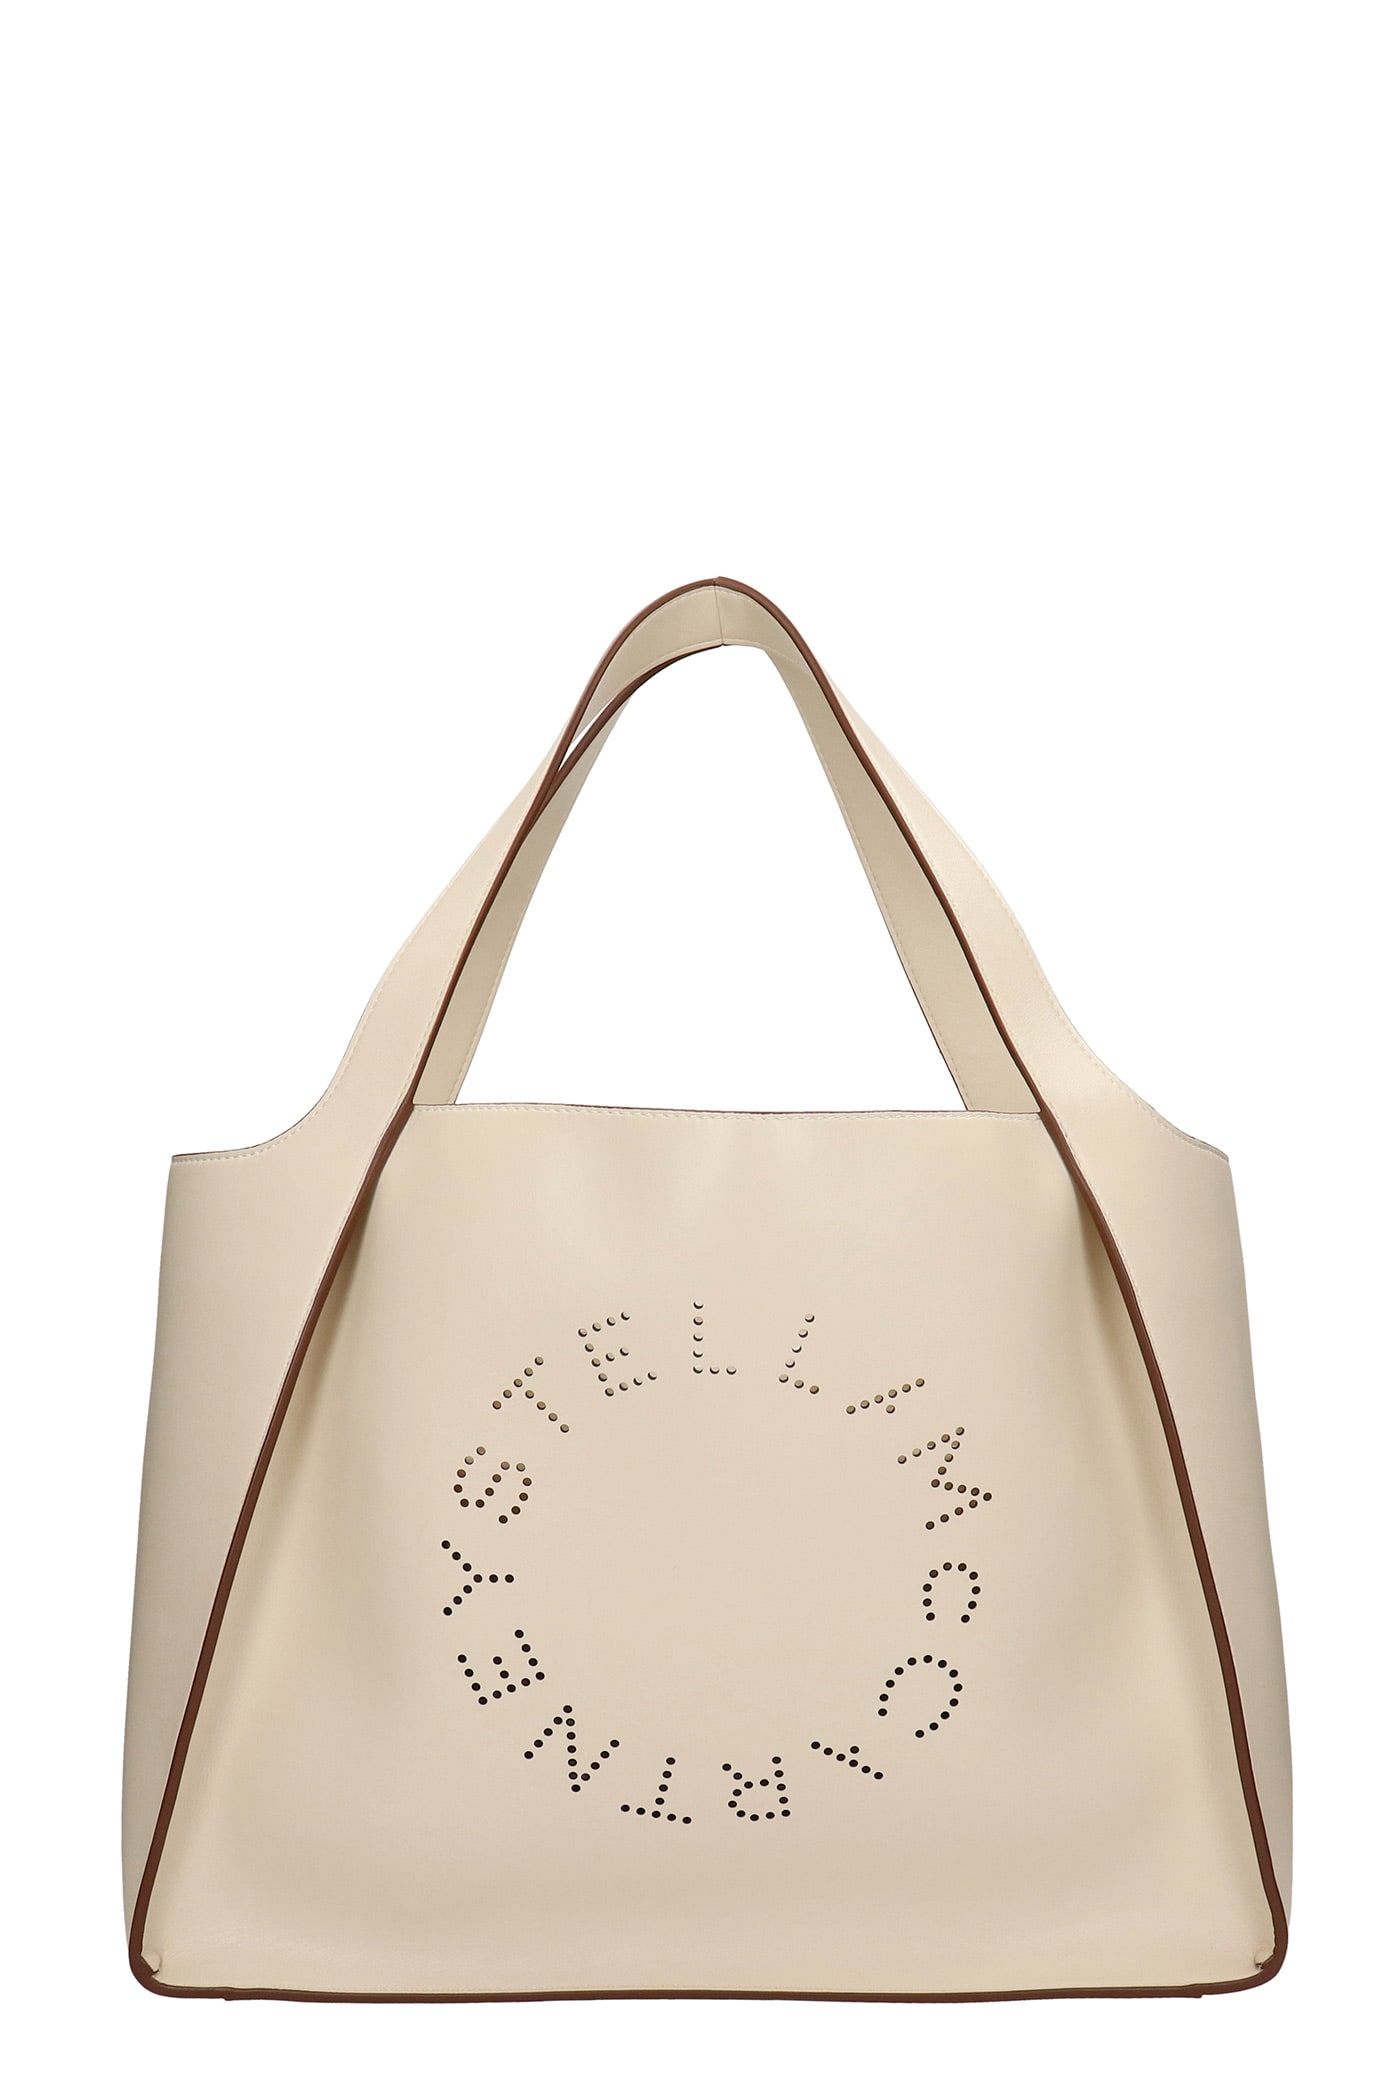 Stella McCartney Tote Eg Tote In White Faux Leather